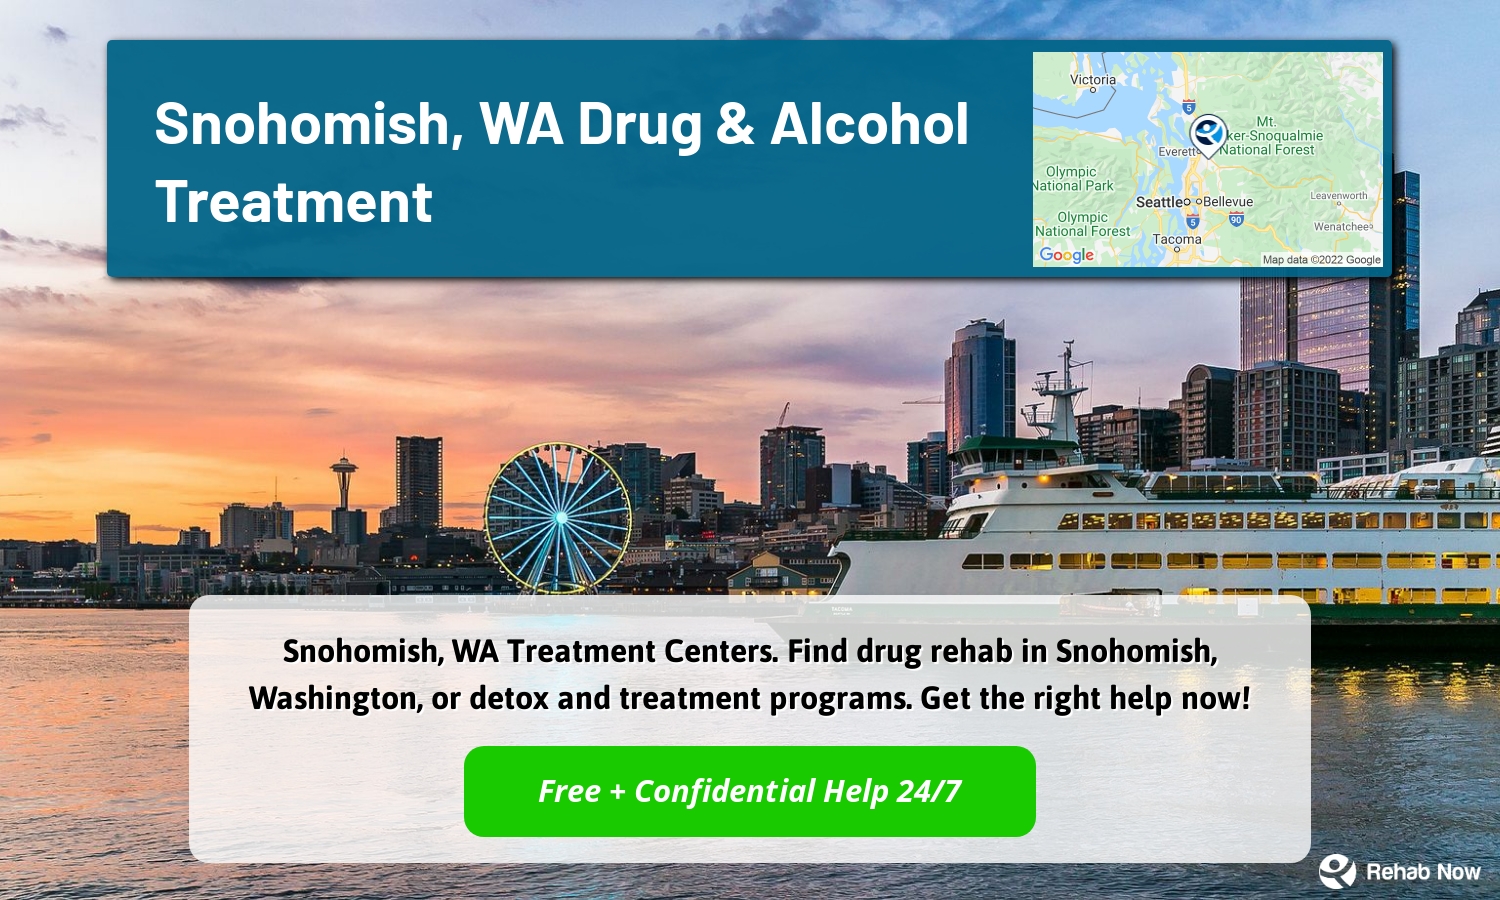 Snohomish, WA Treatment Centers. Find drug rehab in Snohomish, Washington, or detox and treatment programs. Get the right help now!